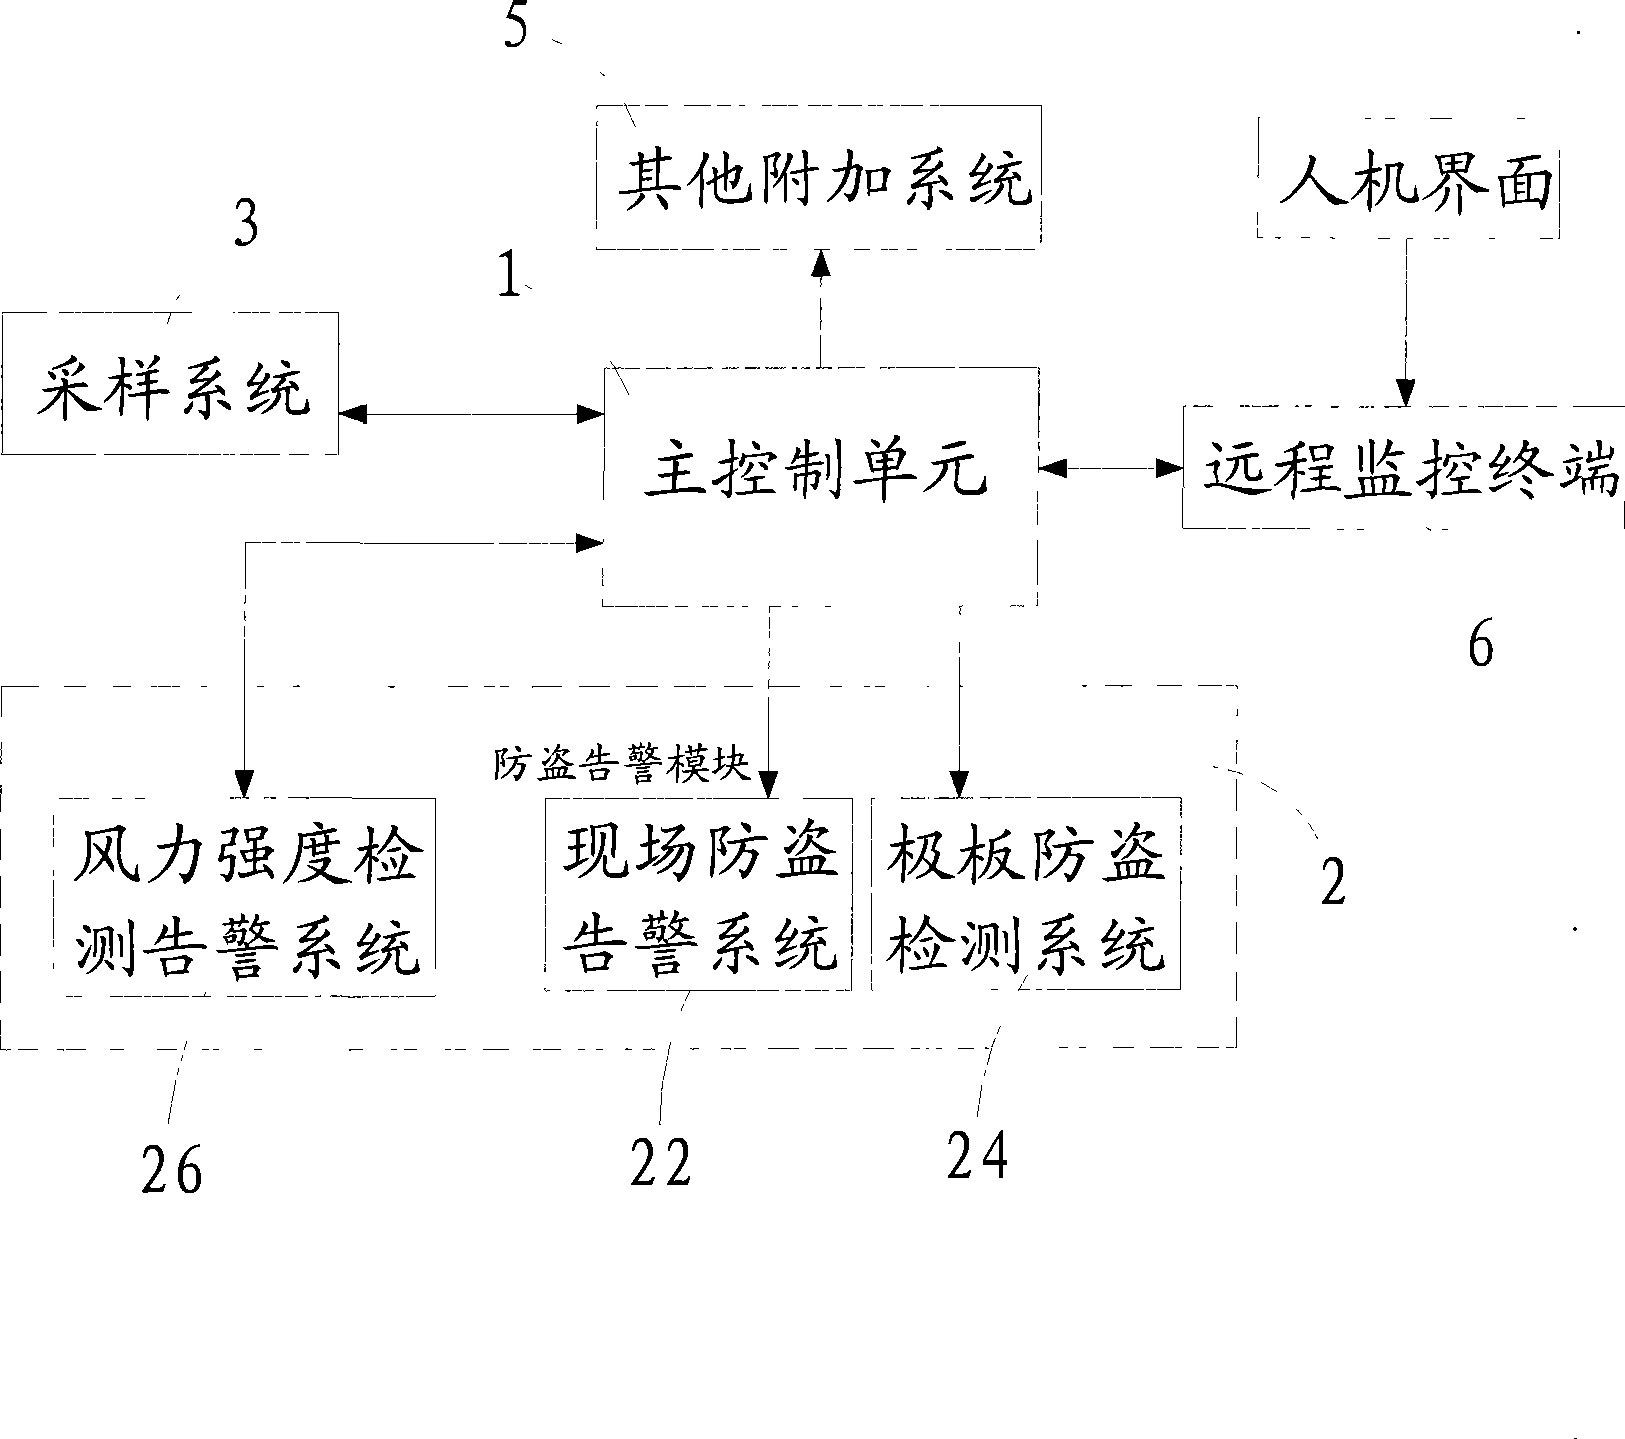 Anti-theft system for electric power source equipment